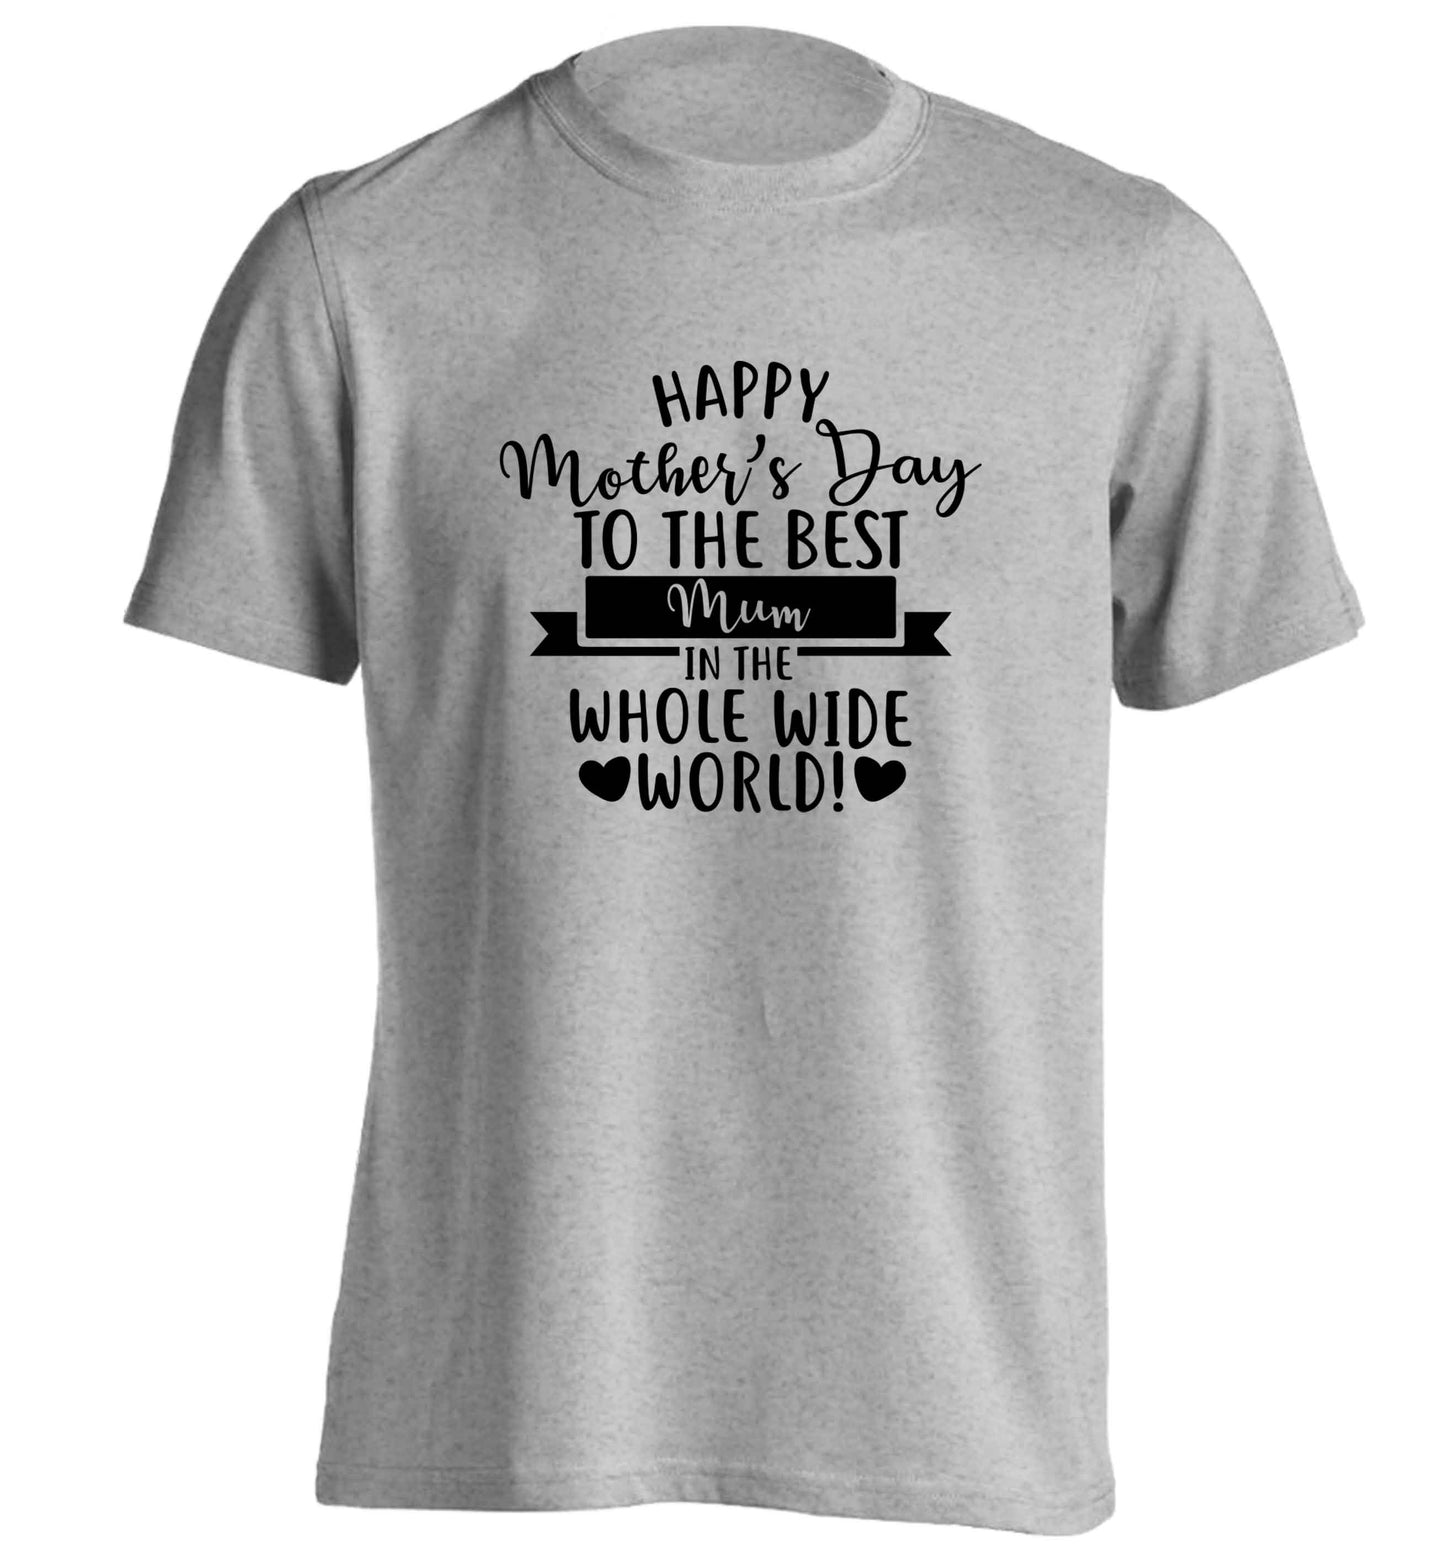 Happy mother's day to the best mum in the world adults unisex grey Tshirt 2XL